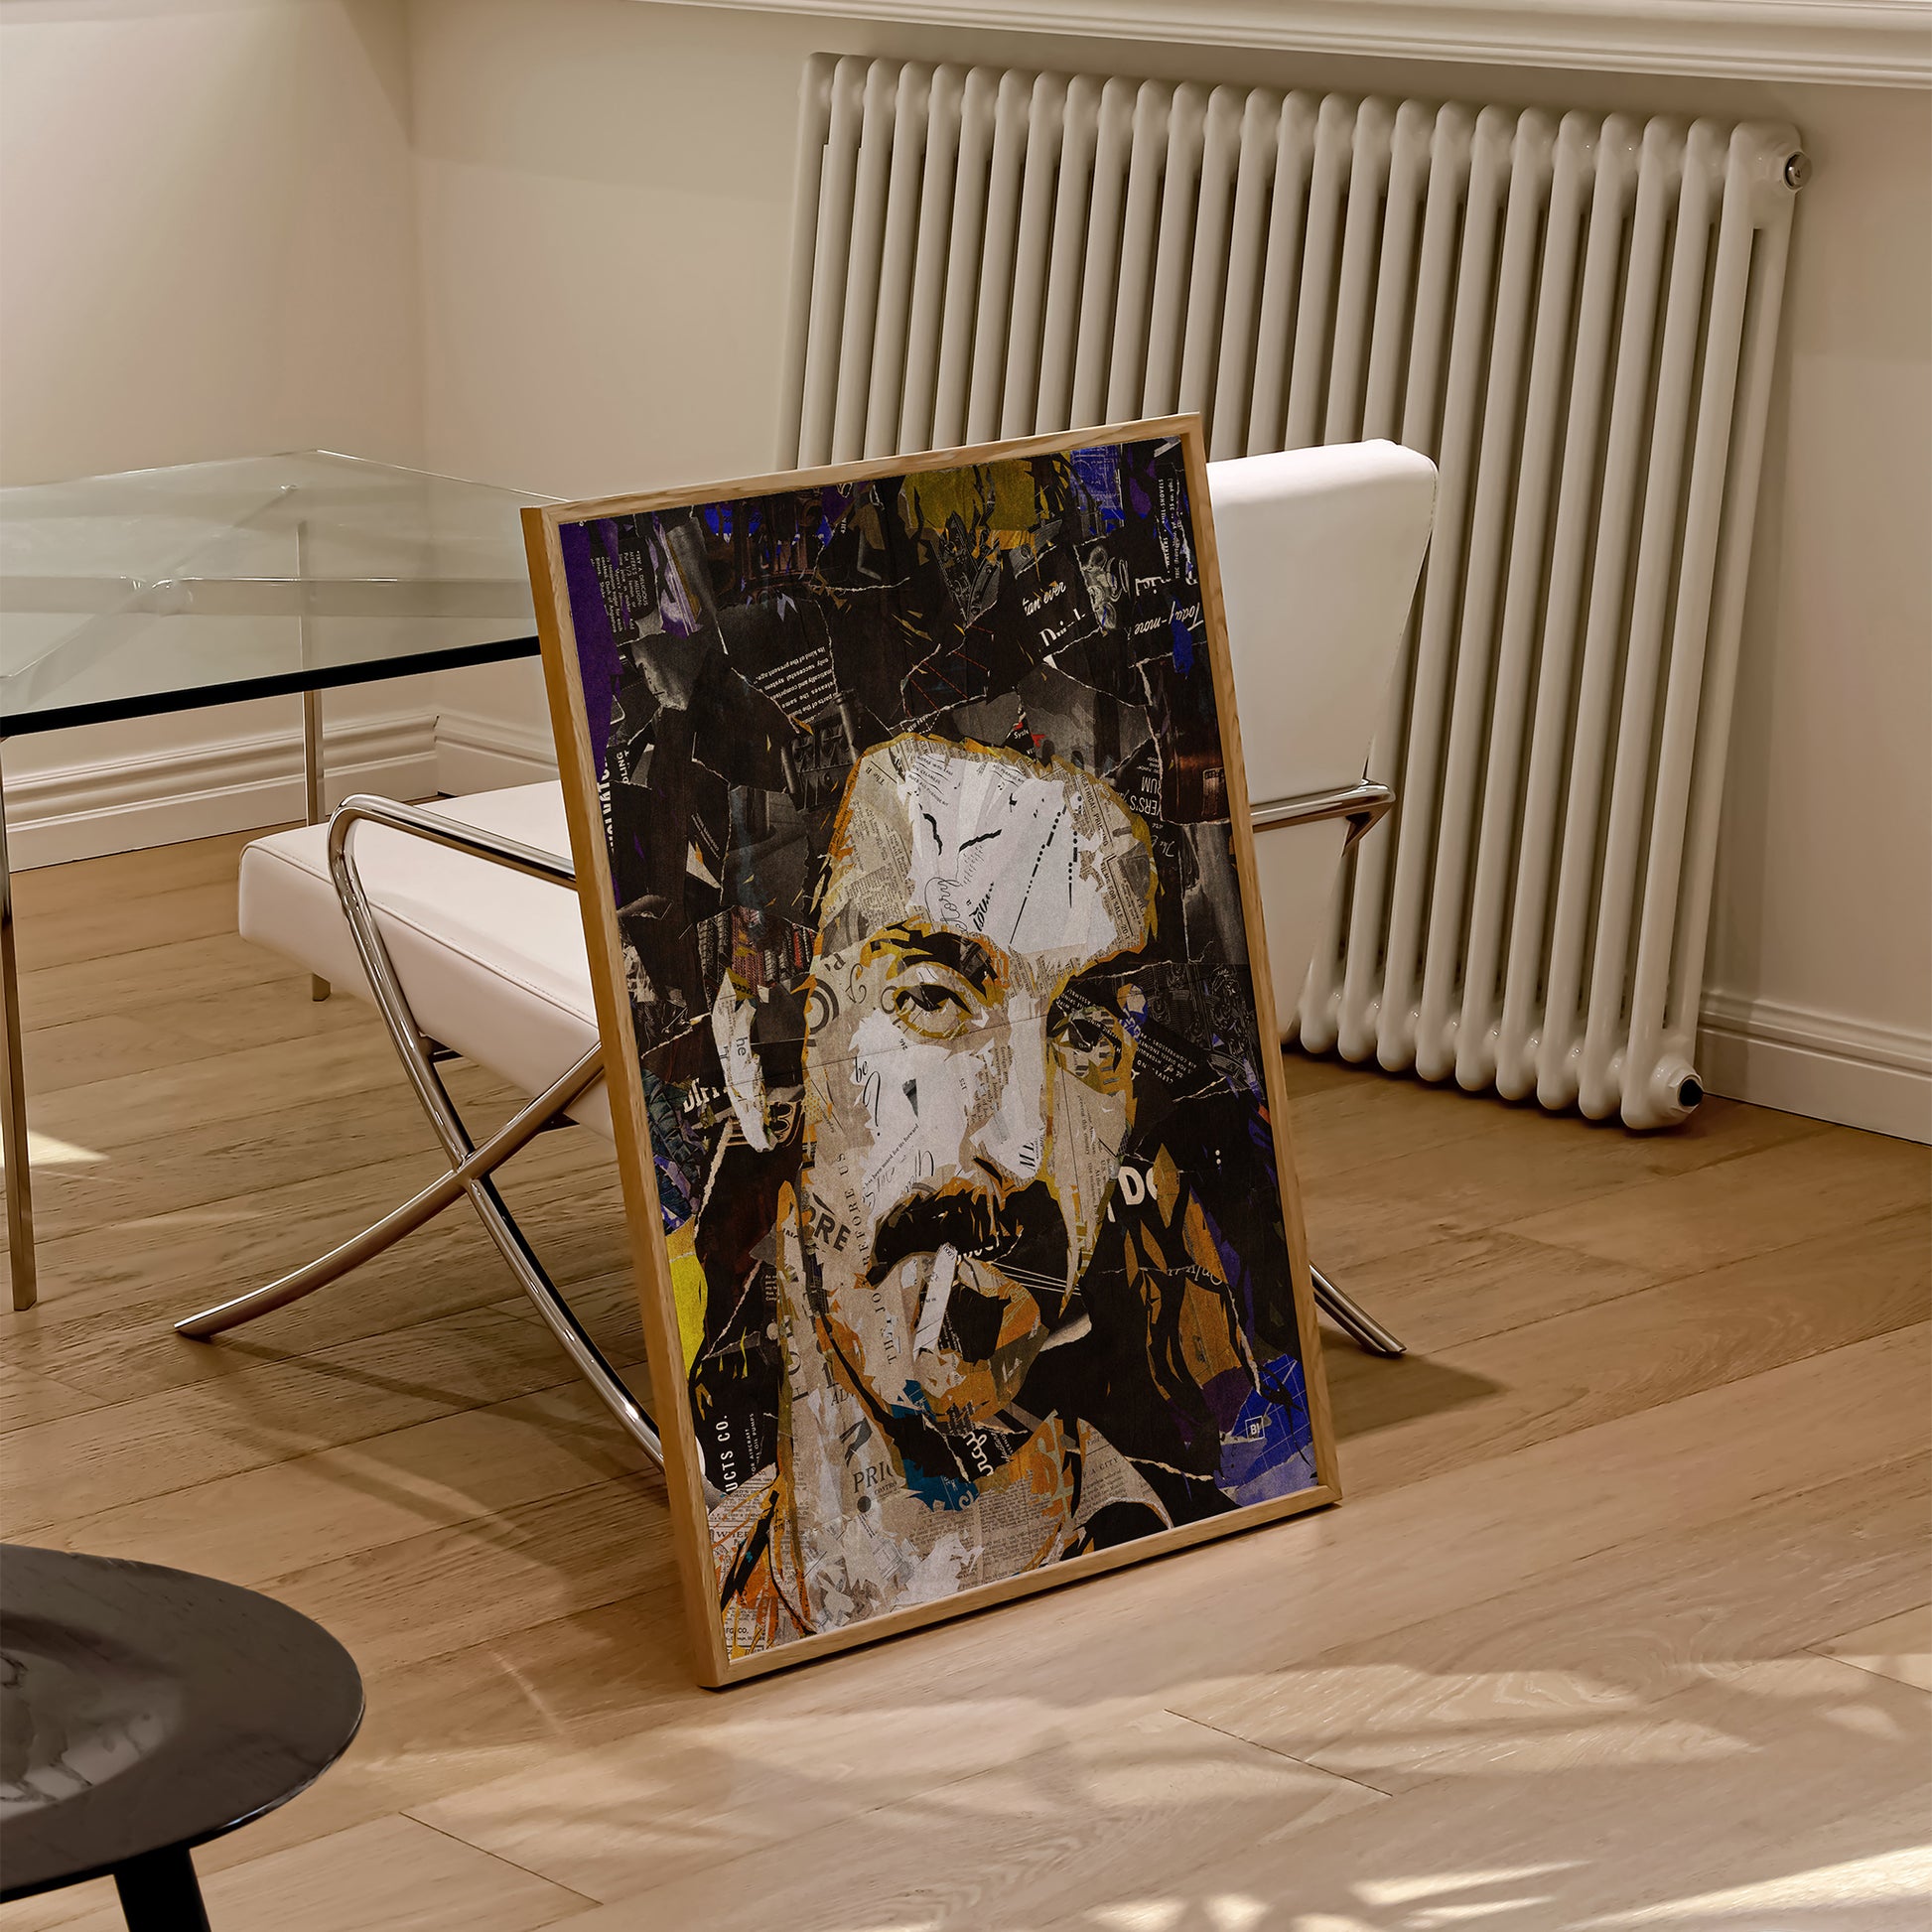 Be inspired by our iconic collage portrait art print of Frank Zappa. This artwork was printed using the giclée process on archival acid-free paper and is presented in a natural oak frame, capturing its timeless beauty in every detail.